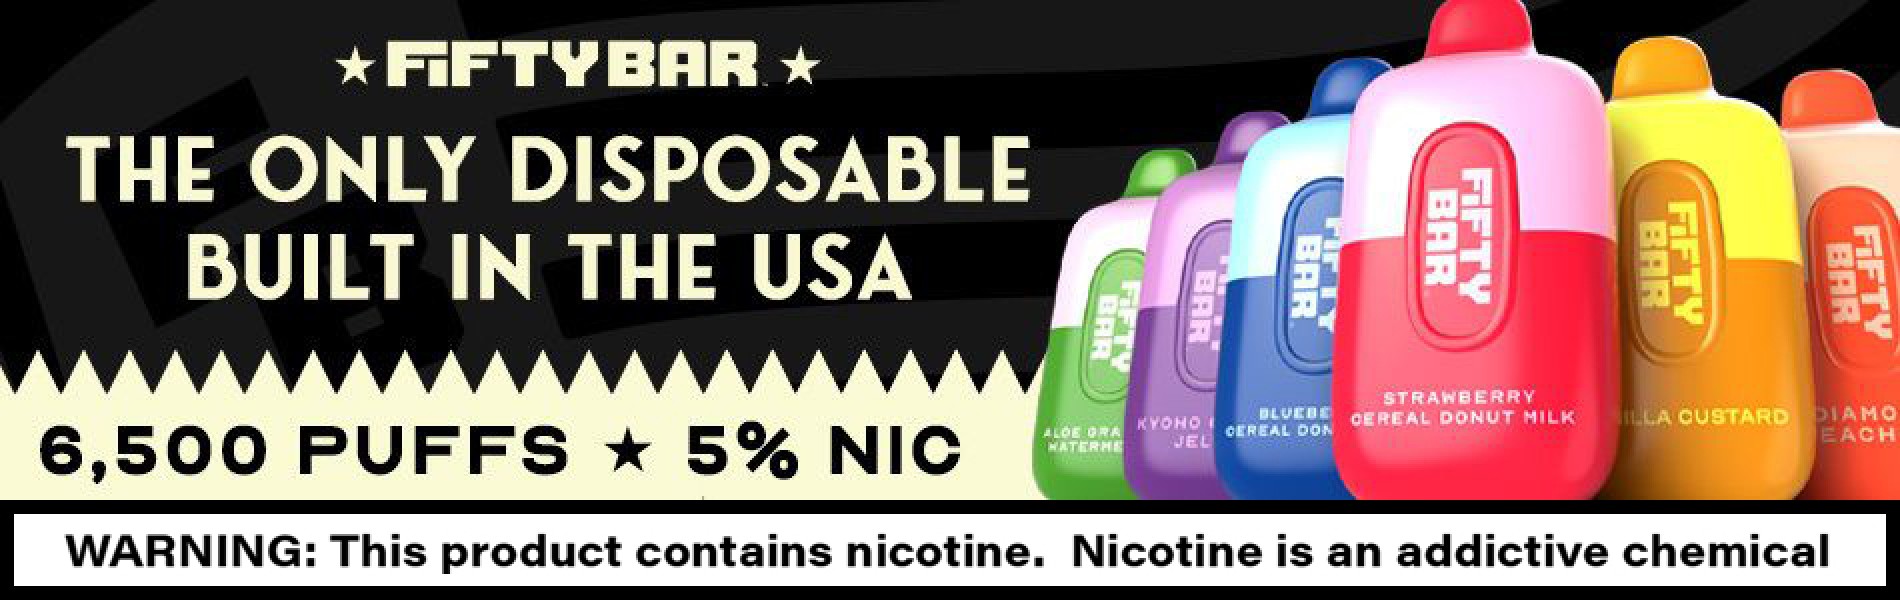 Fifty Bar - 6500 Puffs, the only disposable built in the USA